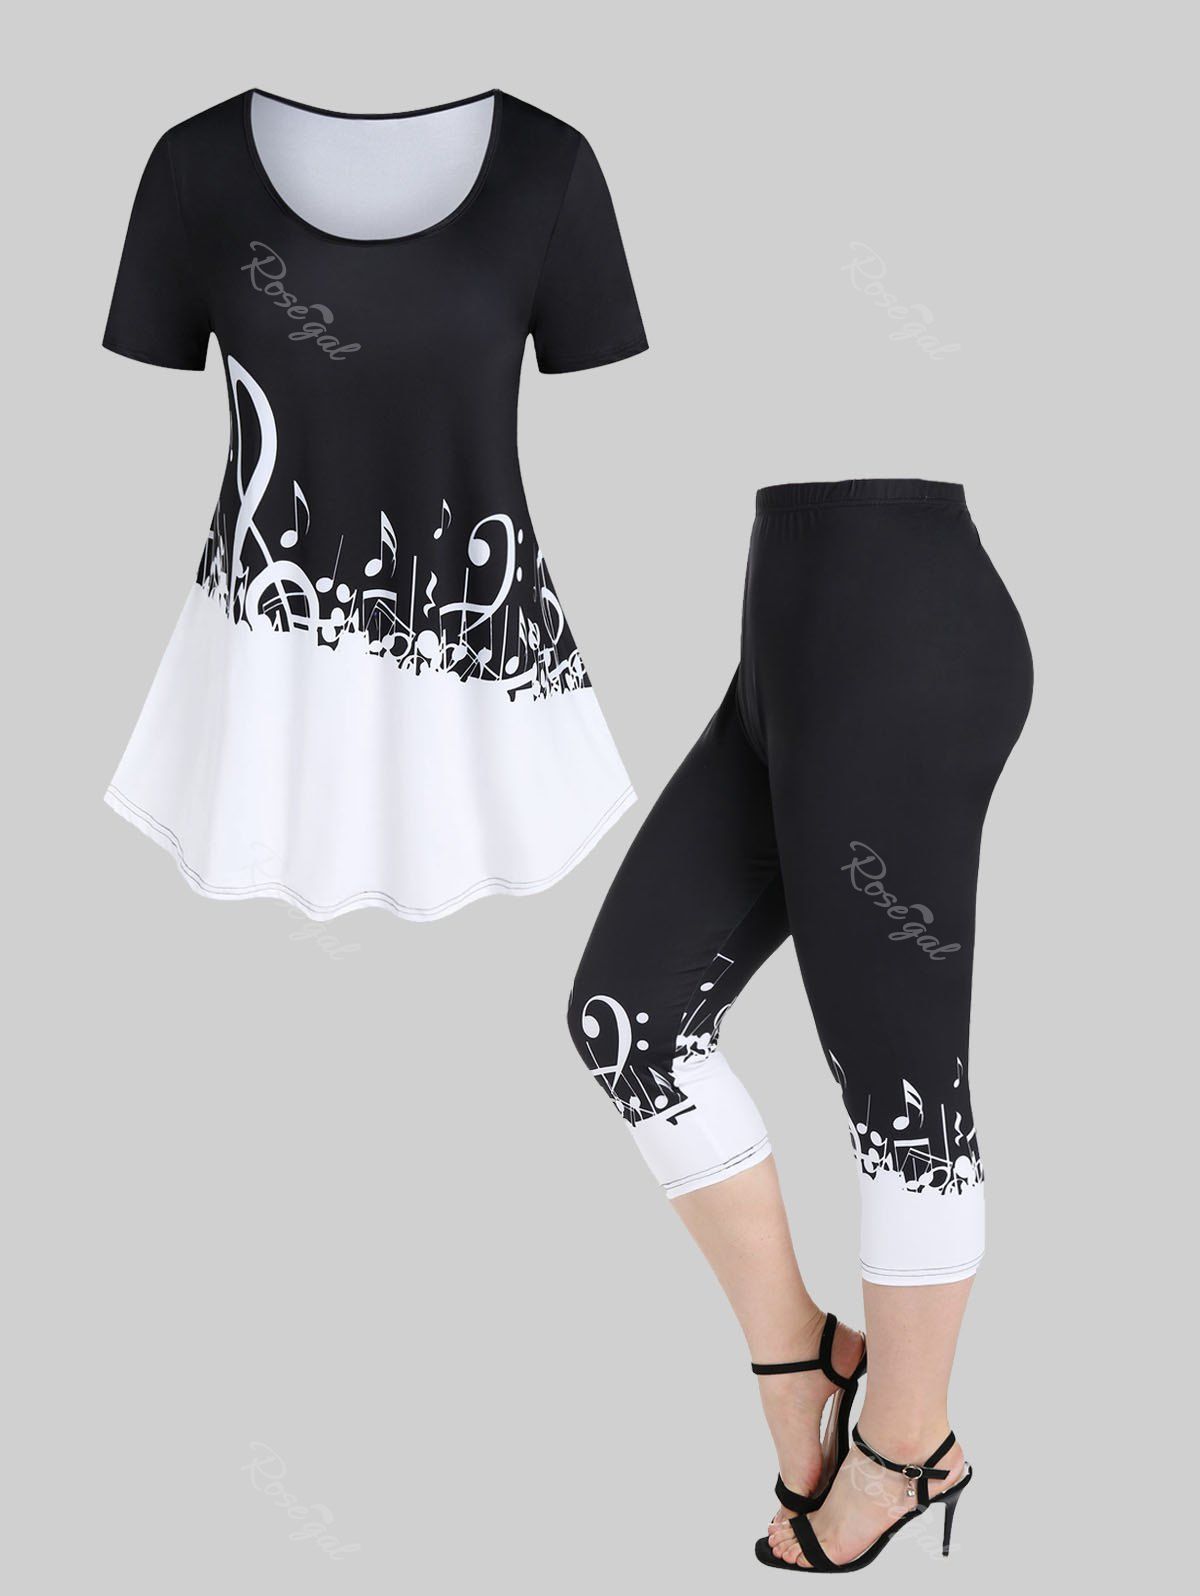 Chic Musical Notes Print Colorblock Tee and Musical Notes Print Colorblock Capri Leggings Plus Size Summer Outfit  